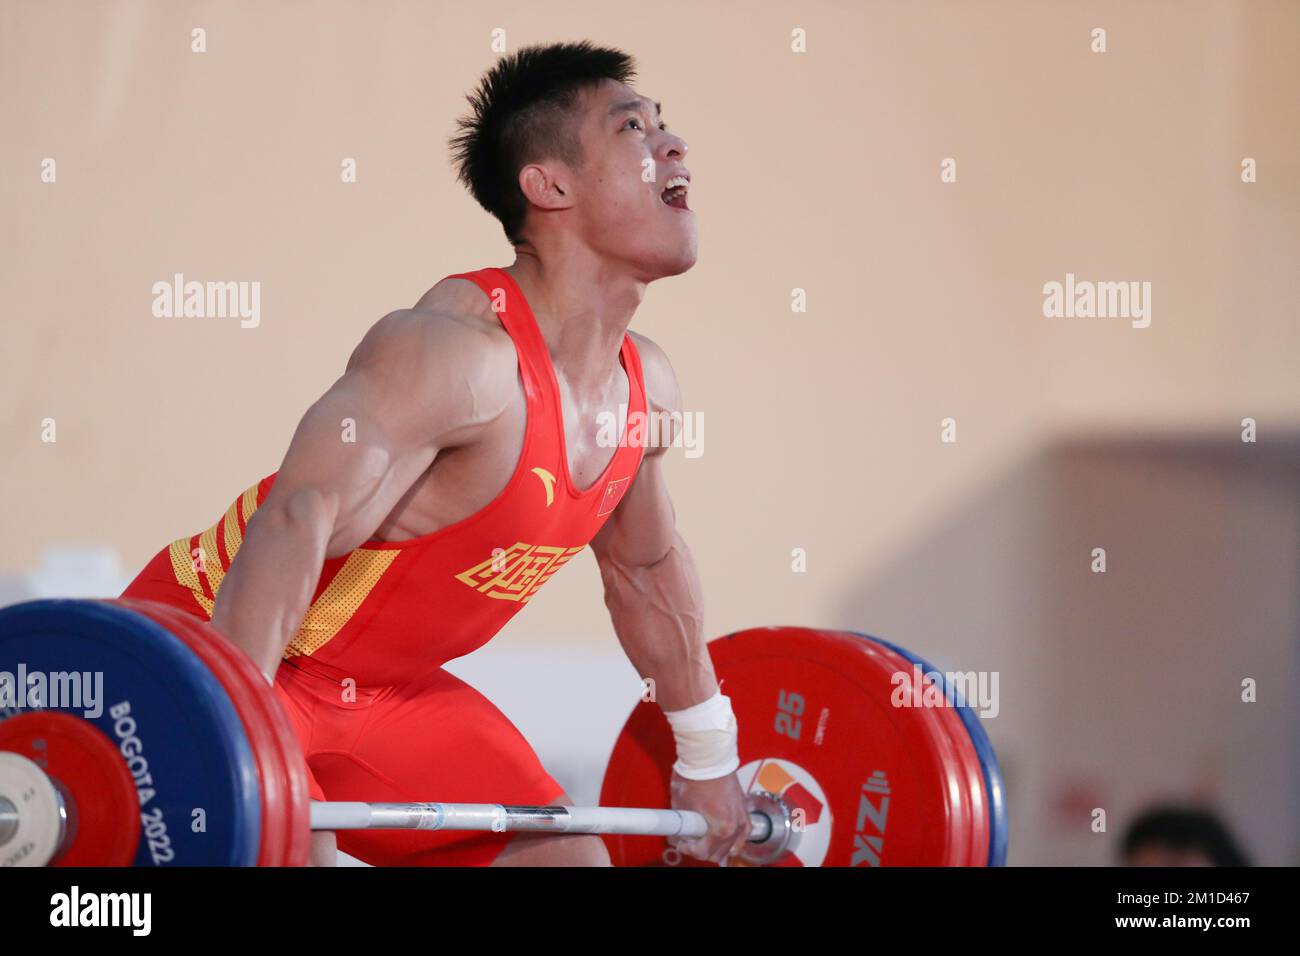 Bogota, Colombia. 11th Dec, 2022. Liu Huanhua of China competes during the mens 89kg snatch event at the 2022 World Weightlifting Championships in Bogota, Colombia, Dec